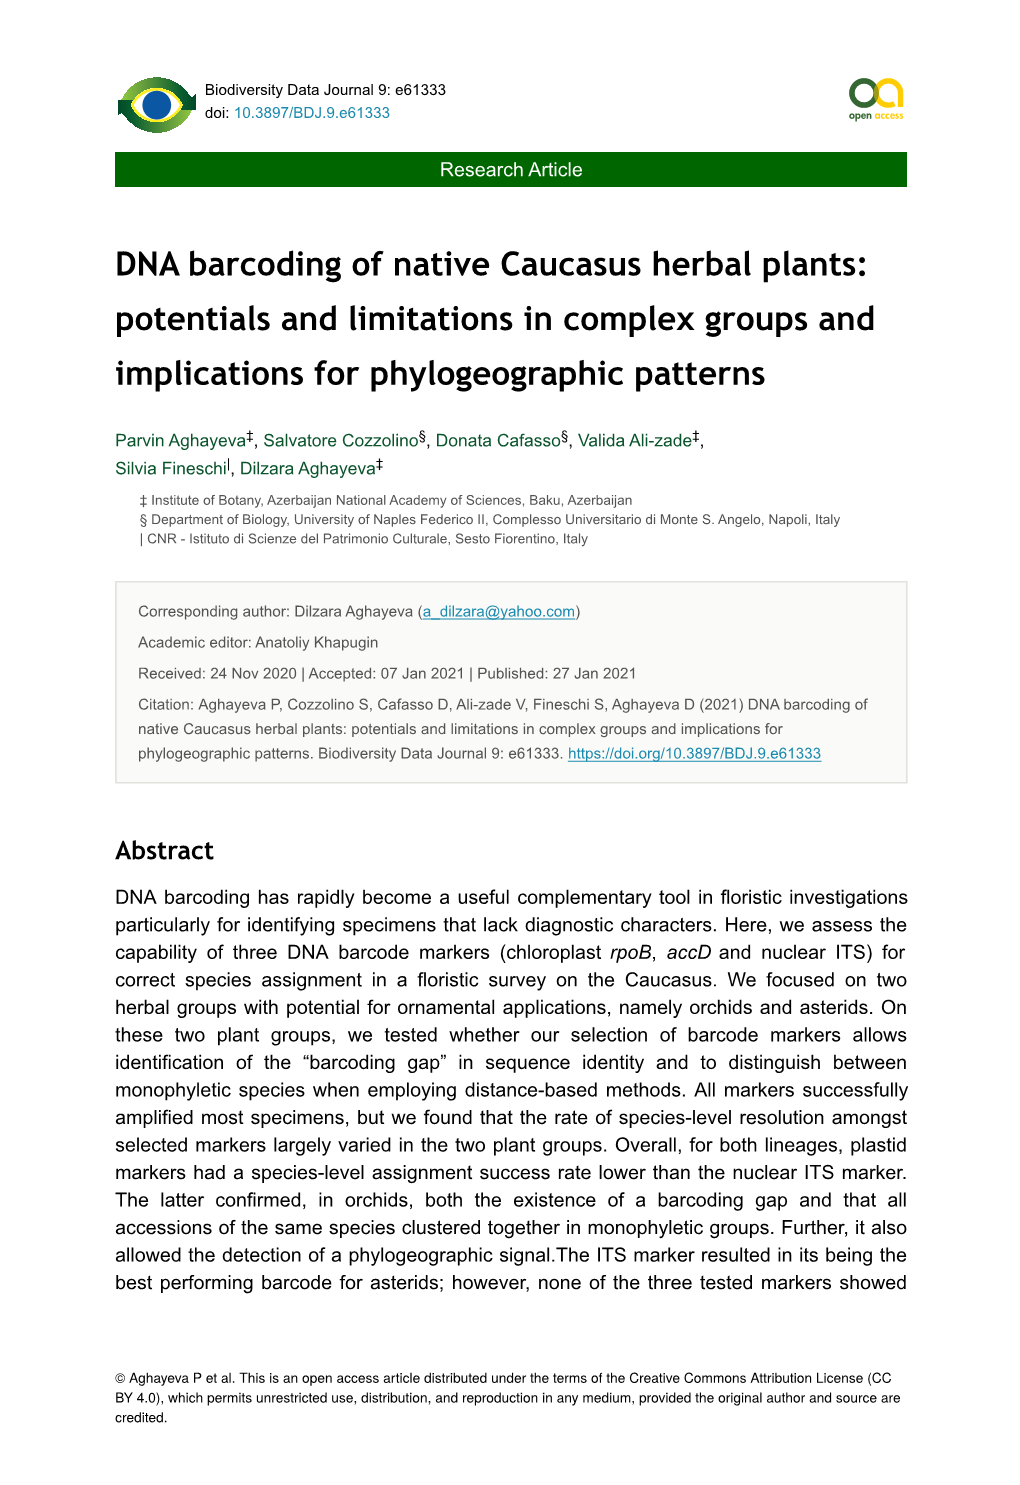 DNA Barcoding of Native Caucasus Herbal Plants: Potentials and Limitations in Complex Groups and Implications for Phylogeographic Patterns